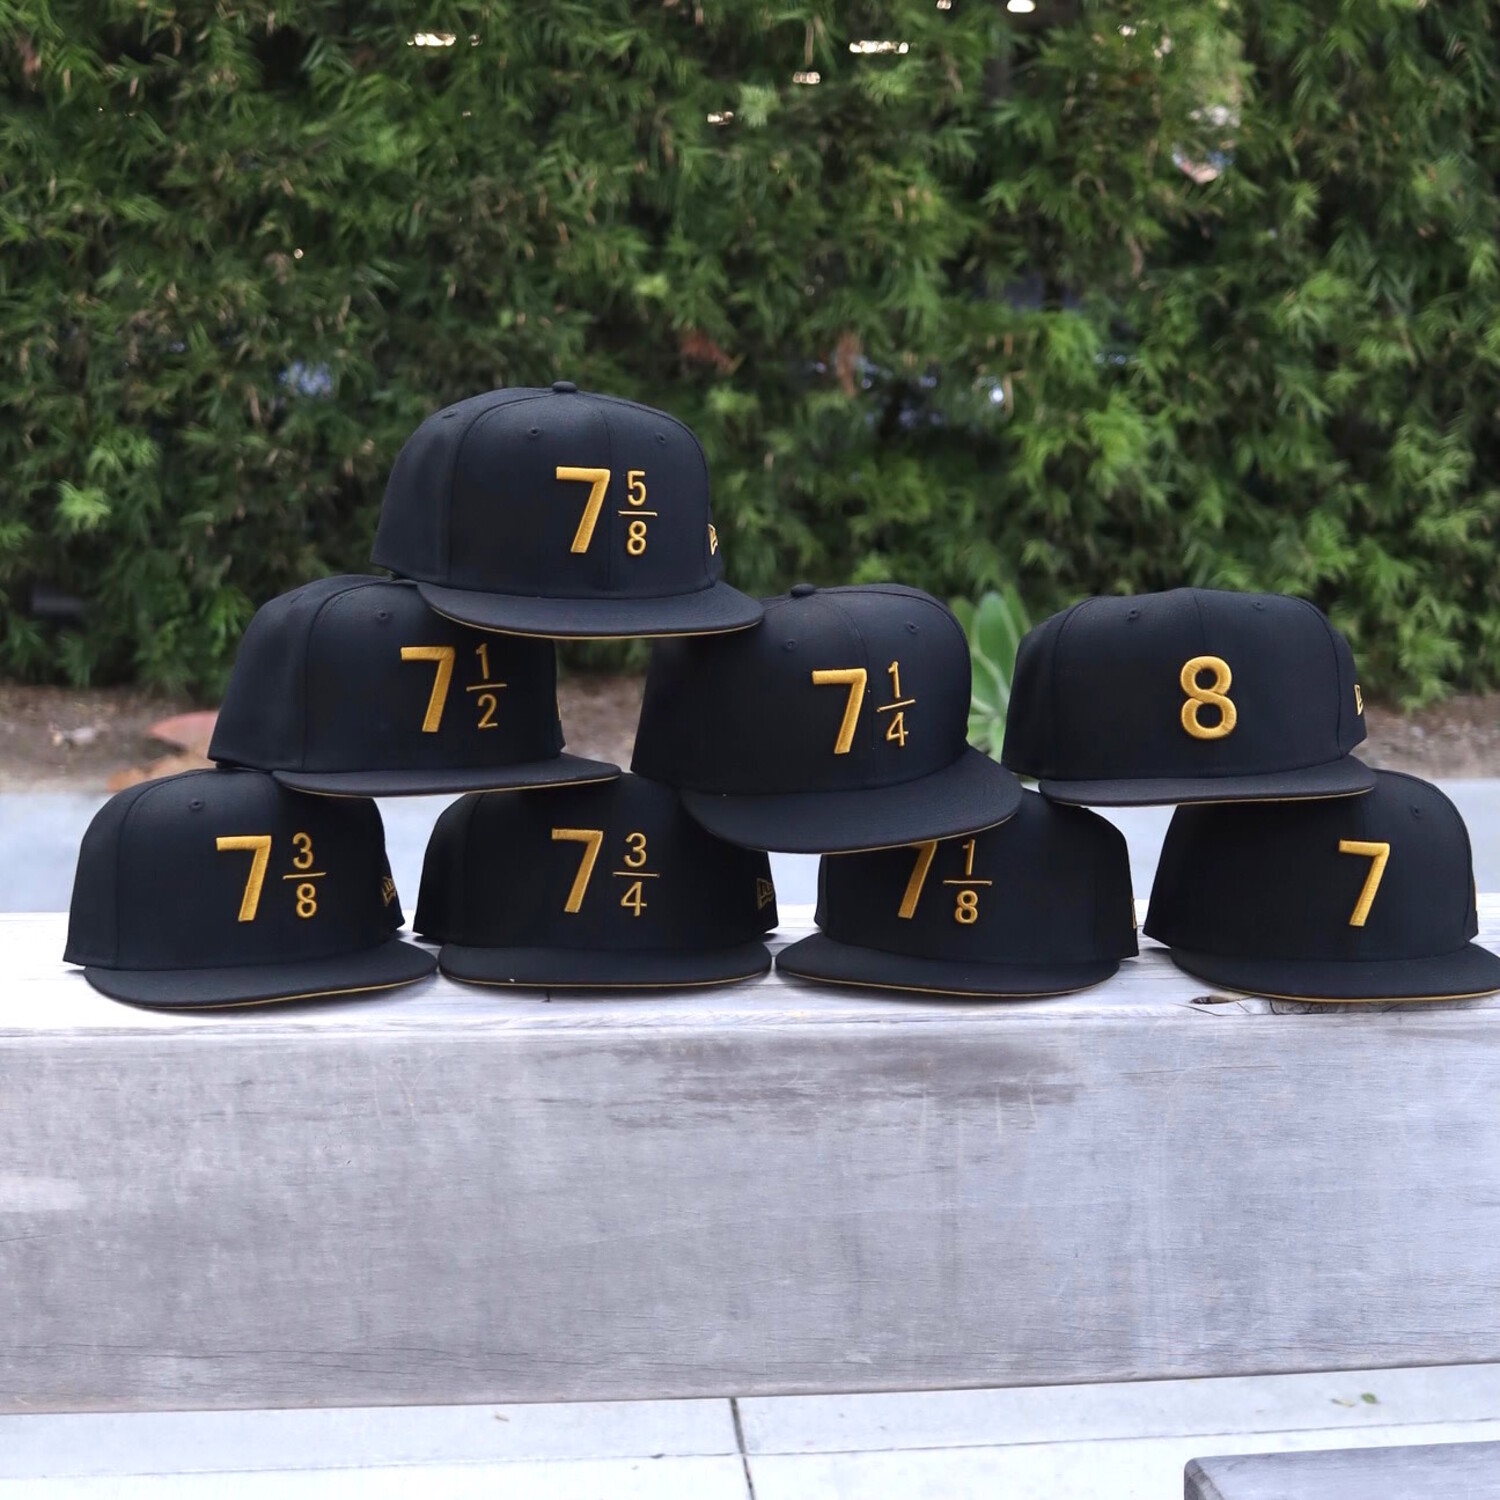 New Era Cap Signature Size 59FIFTY Fitted Hat